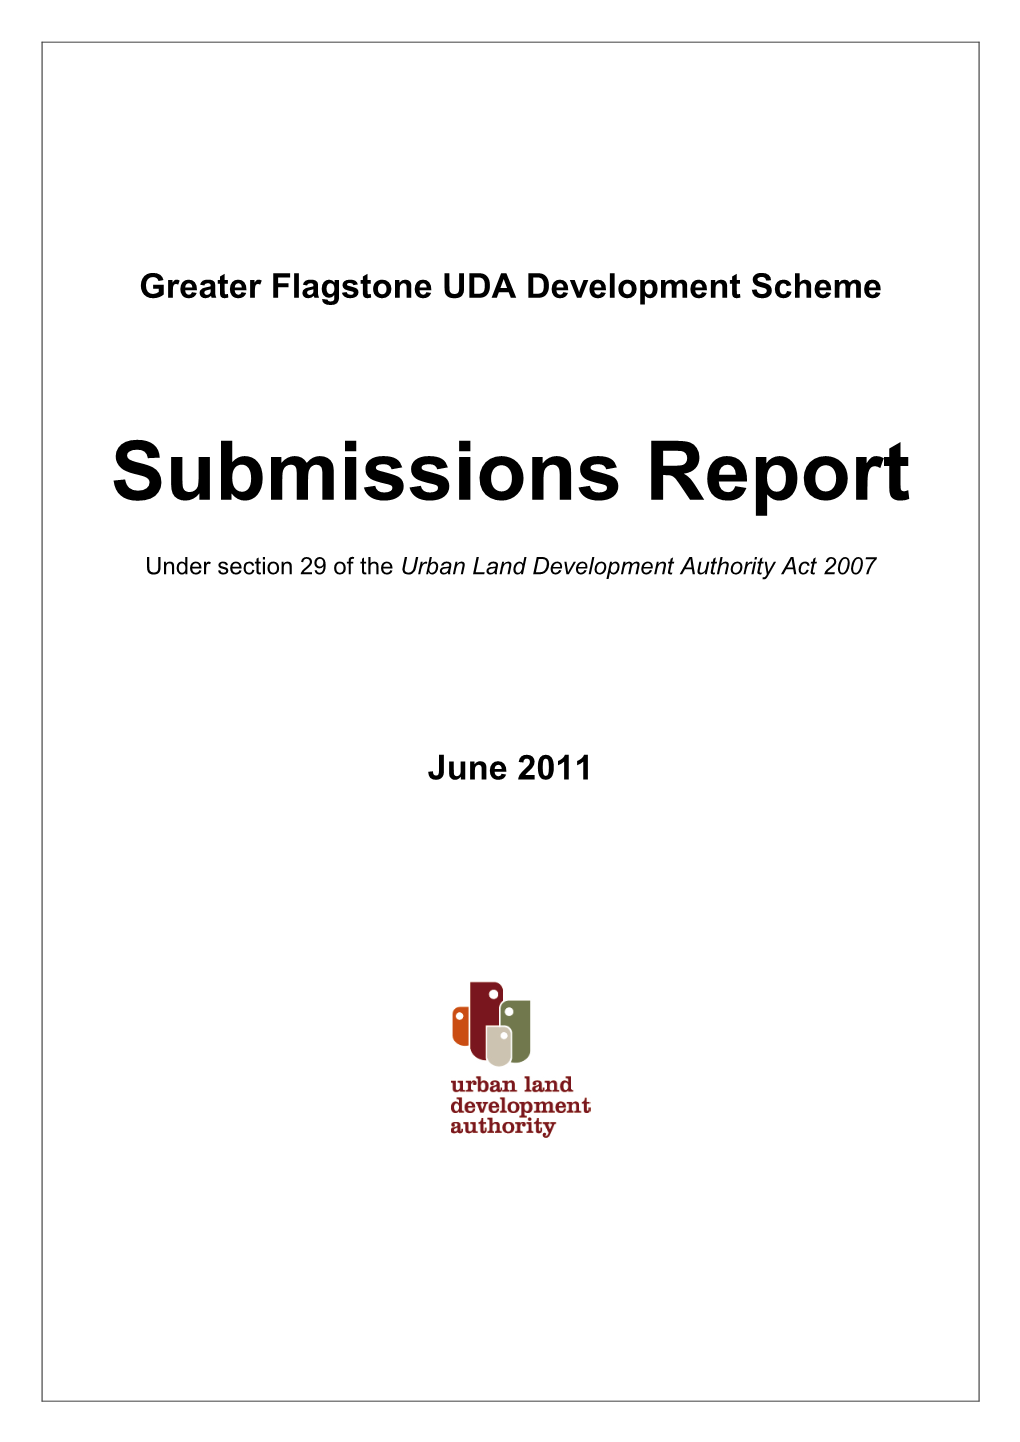 Greater Flagstone PDA Submissions Report